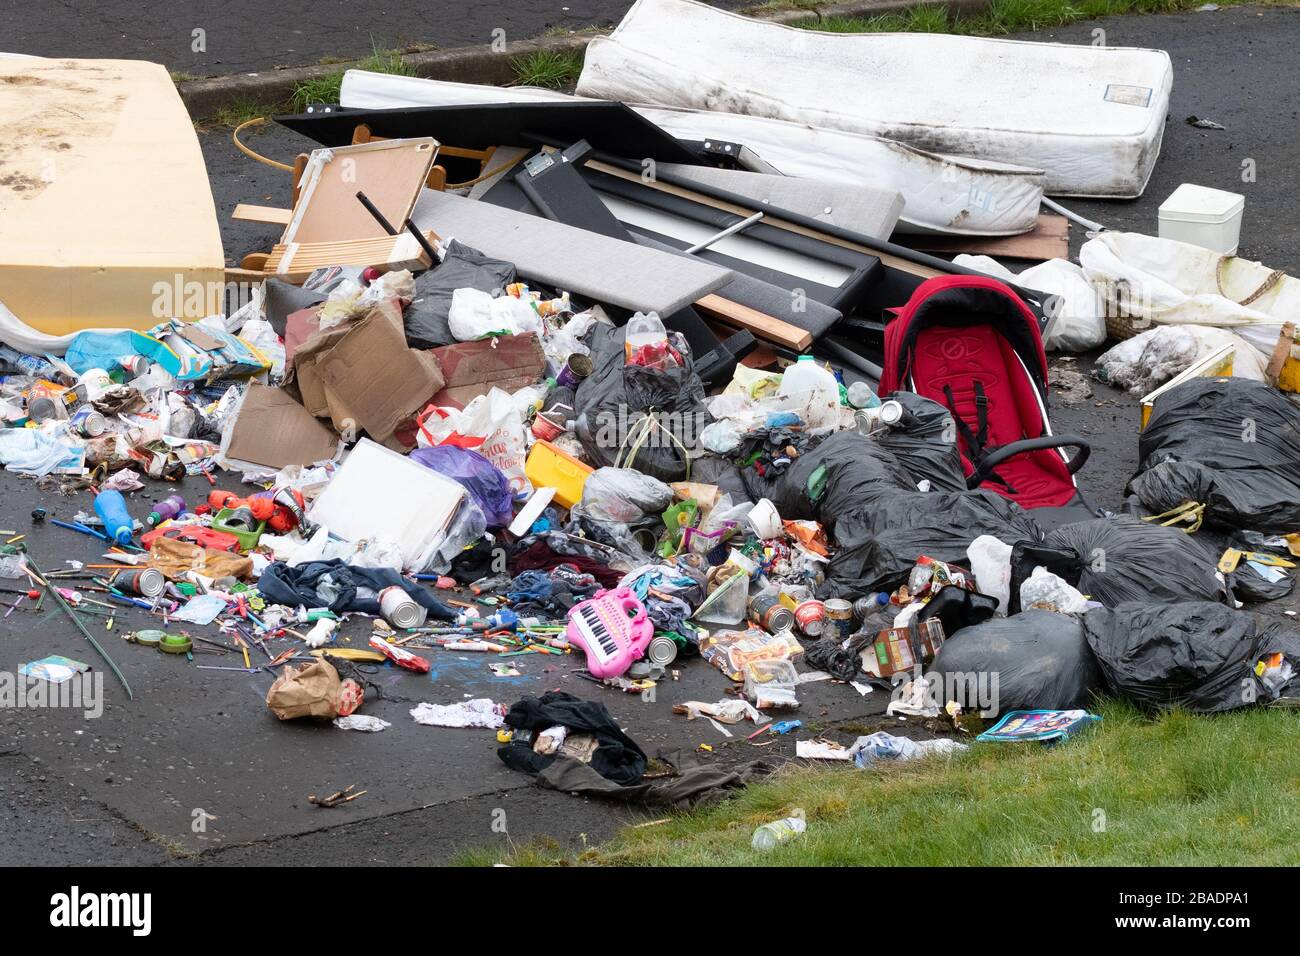 fly tipping uk - large pile of household rubbish including childrens toys and mattresses - Easterhouse, Glasgow, Scotland, UK Stock Photo